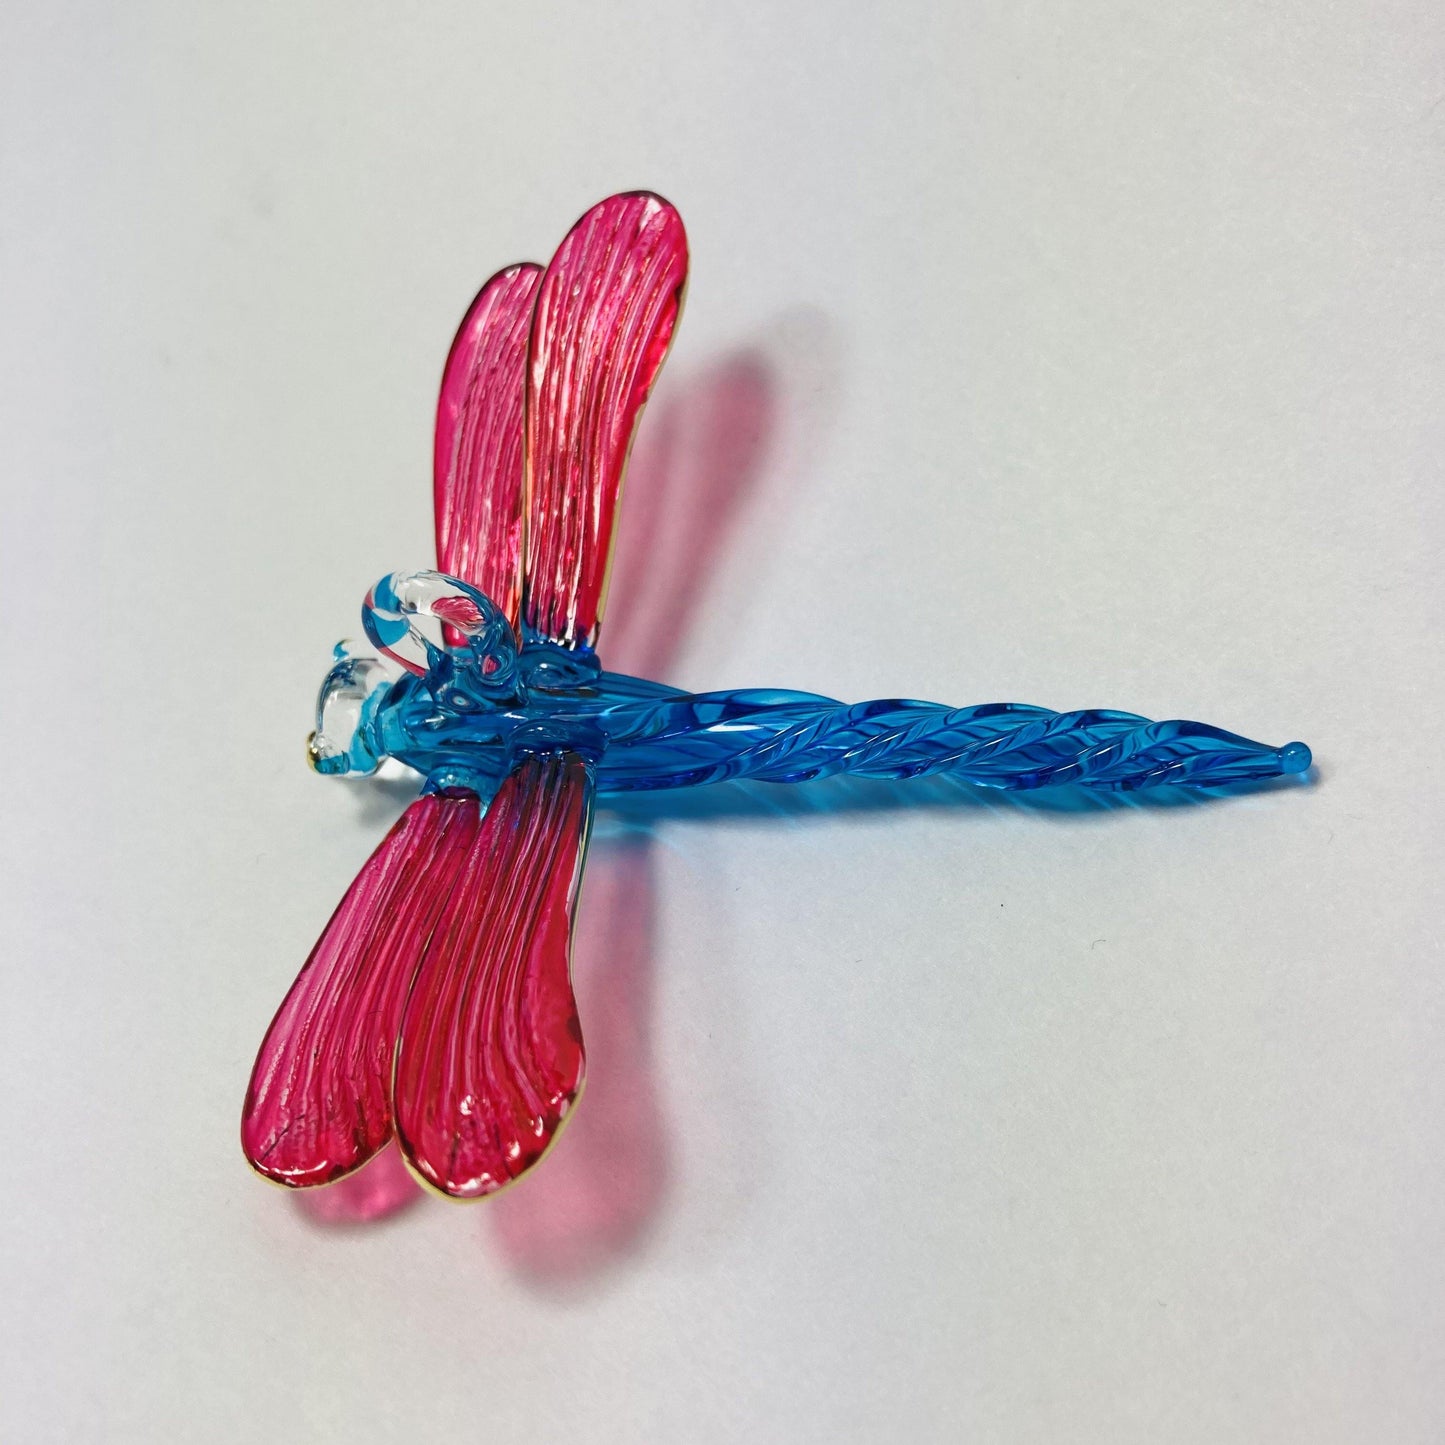 Blown Glass Ornament - Dragonfly Fuchsia & Turquoise